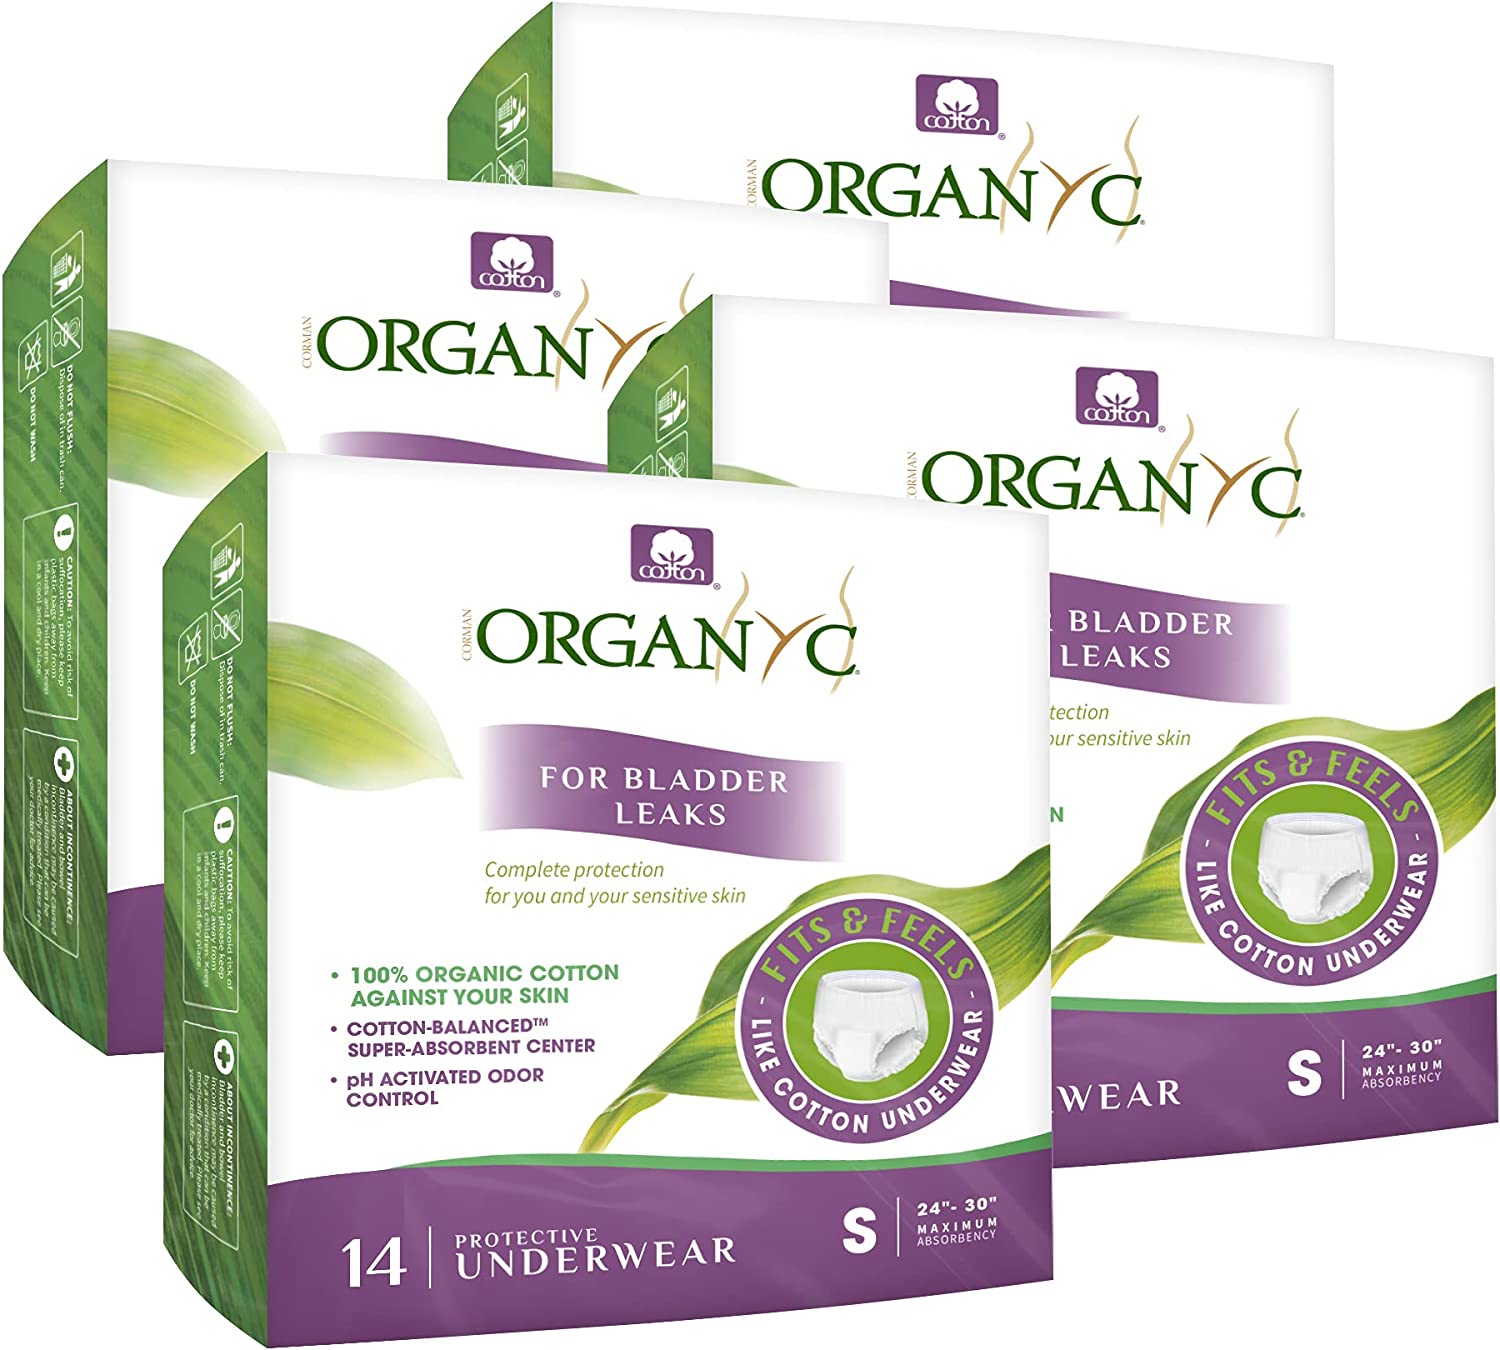 Organyc Bladder Control Underwear for Women – Organic Cotton Protective Underwear for Incontinence, Leak Protection, Odor Protection and Sensitive Skin, Small, 56 Count